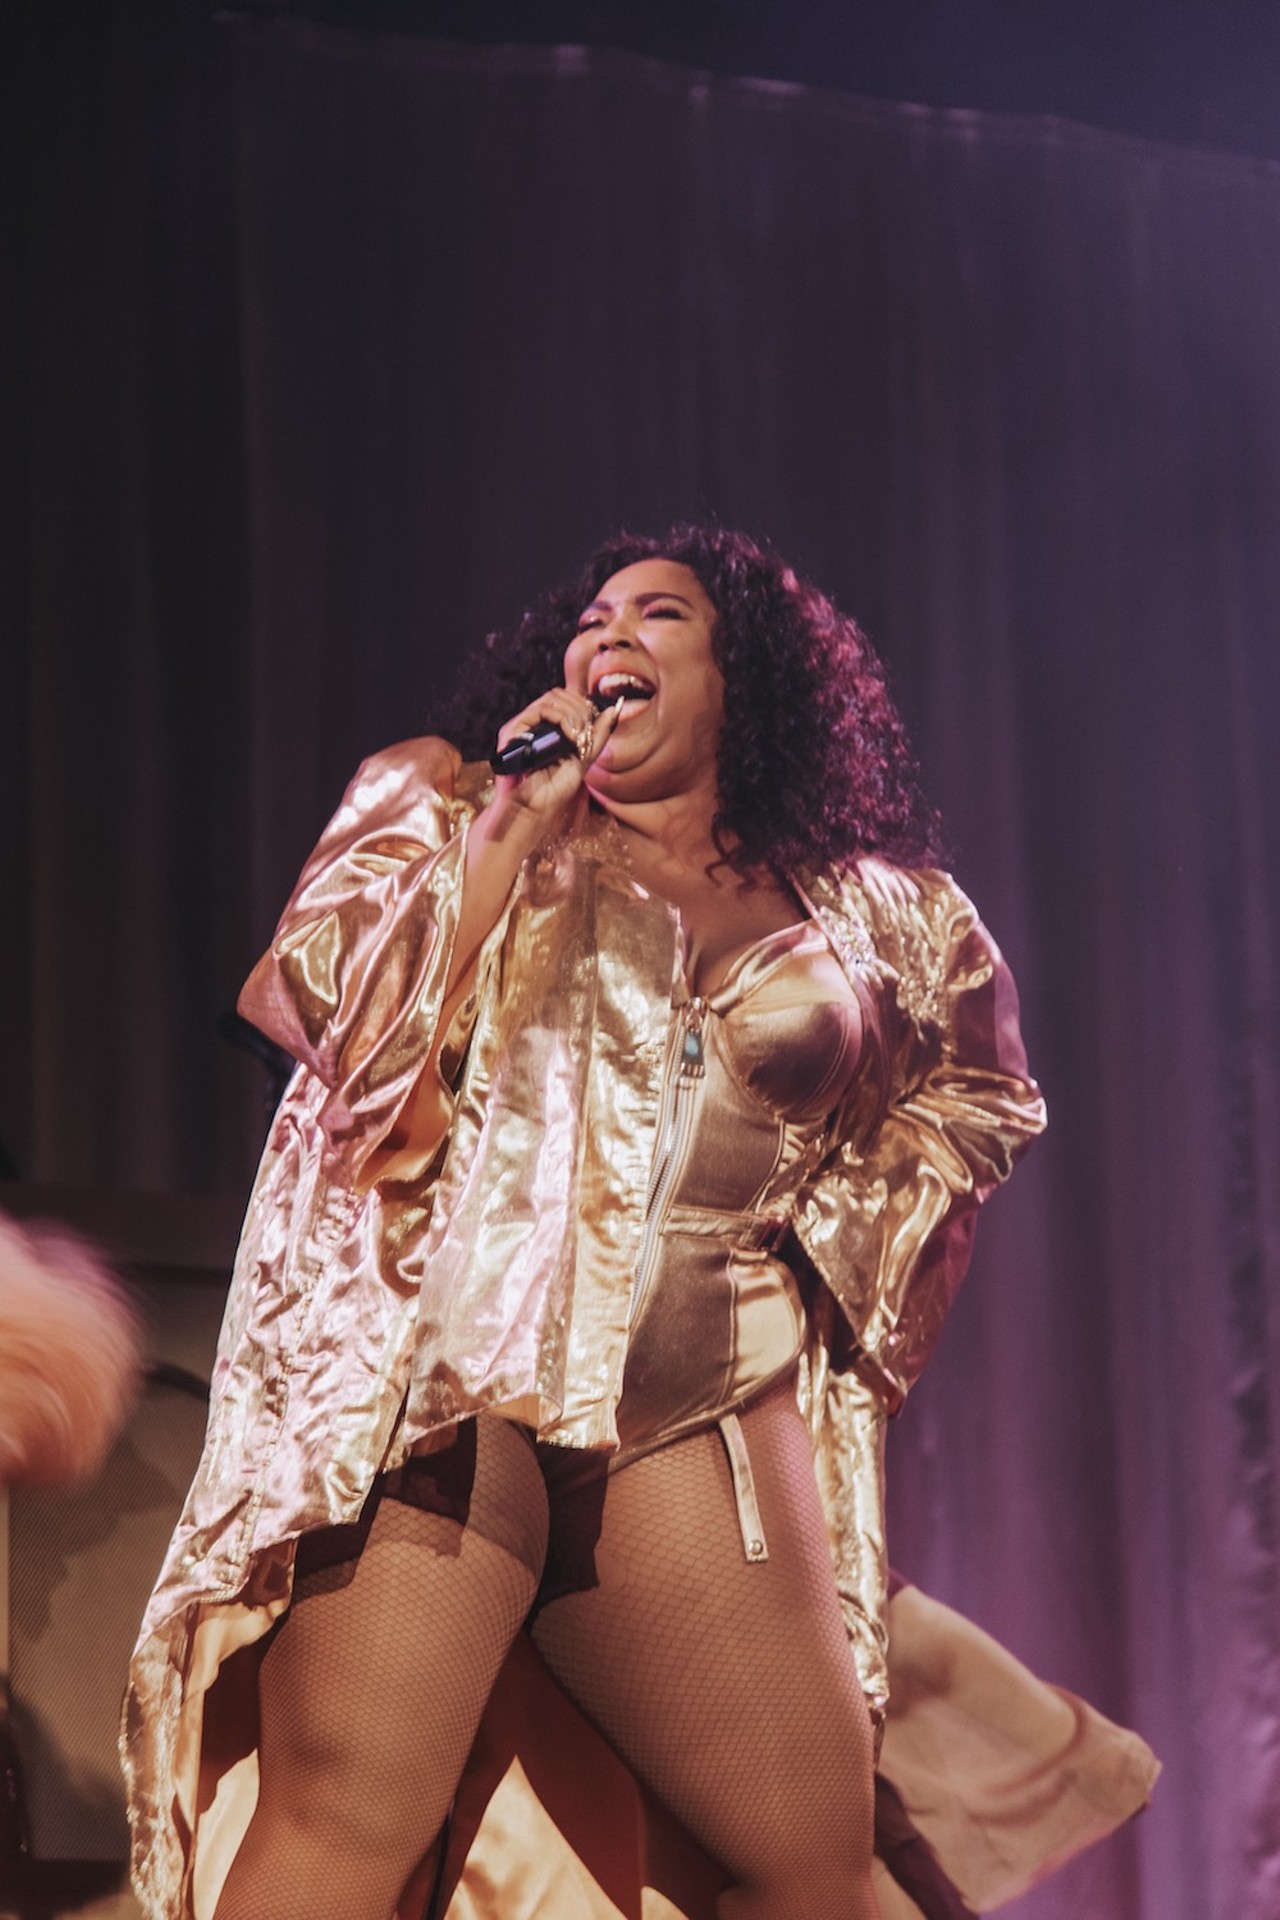 Fabulous photos of Lizzo making her Tampa debut at a sold-out Yuengling Center